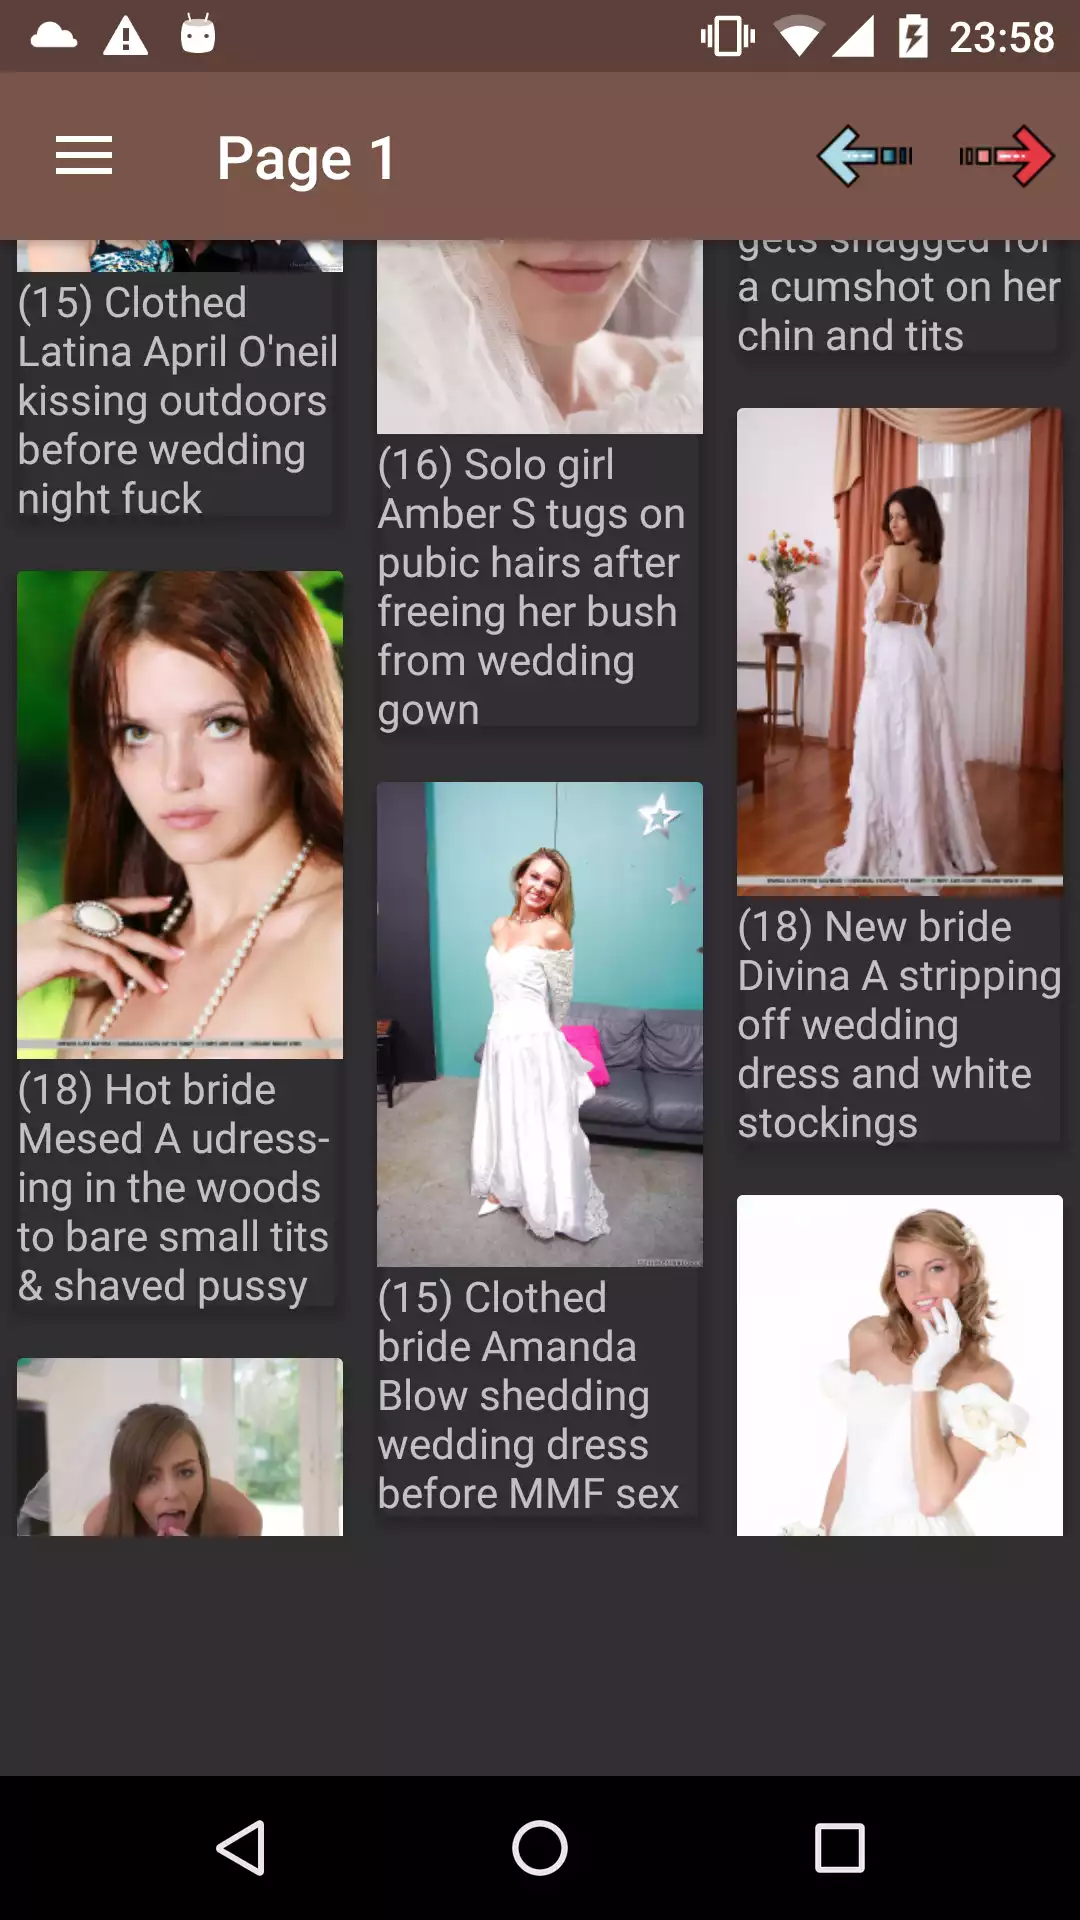 Wedding Galleries sara,porn,star,jay,android,pics,new,apk,apps,galleries,gloryhole,collection,sexy,hentai,pic,app,lisa,photos,wallpaper